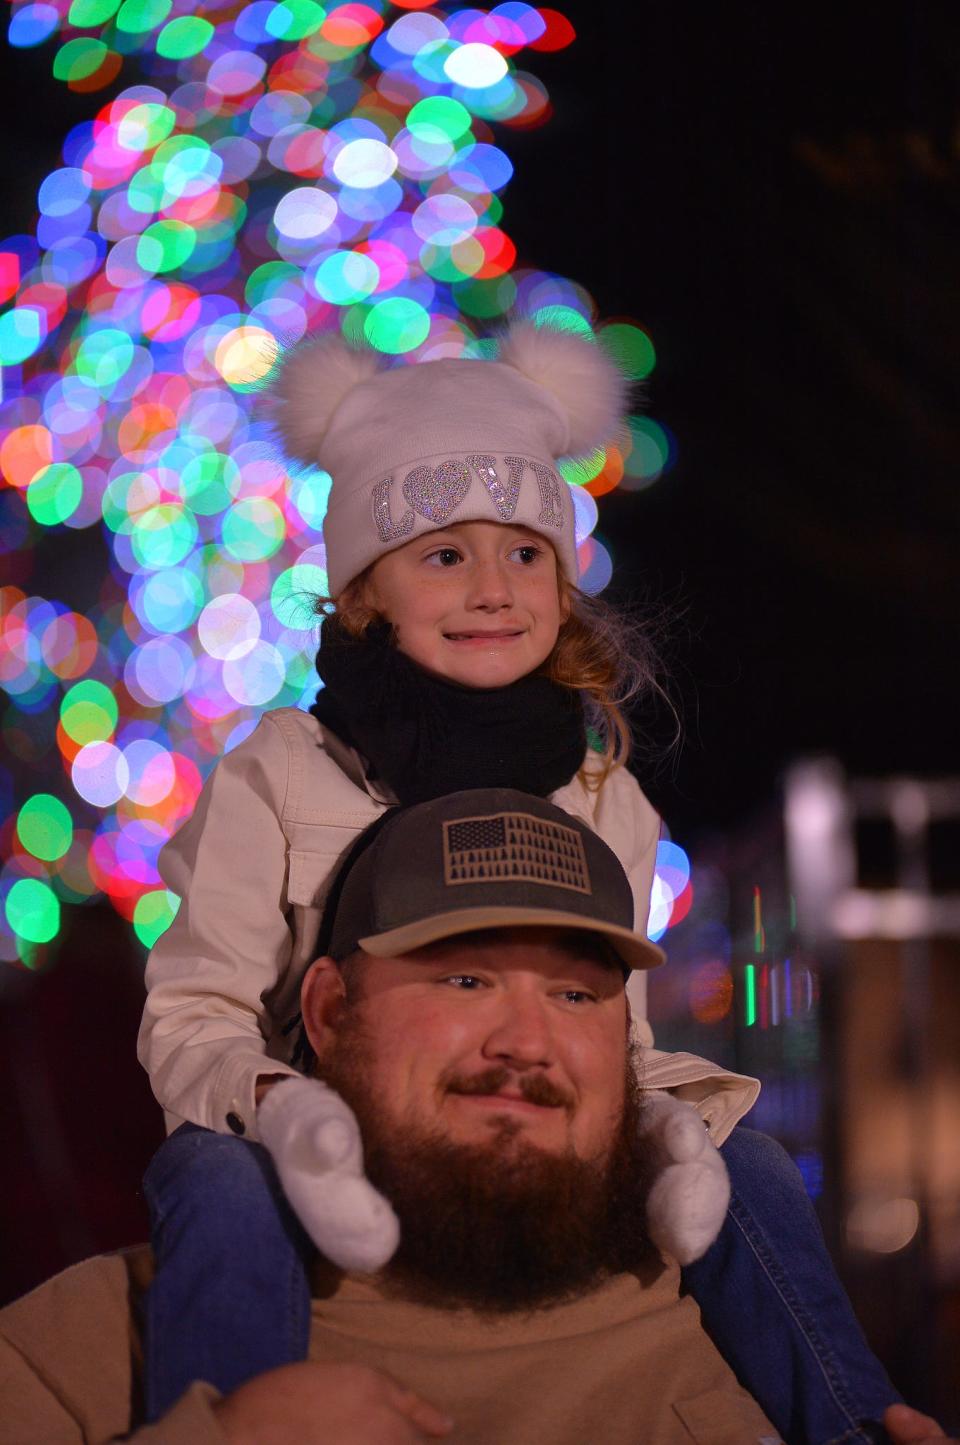 Dickens of a Christmas, Ferris Wheel and more festive Spartanburg